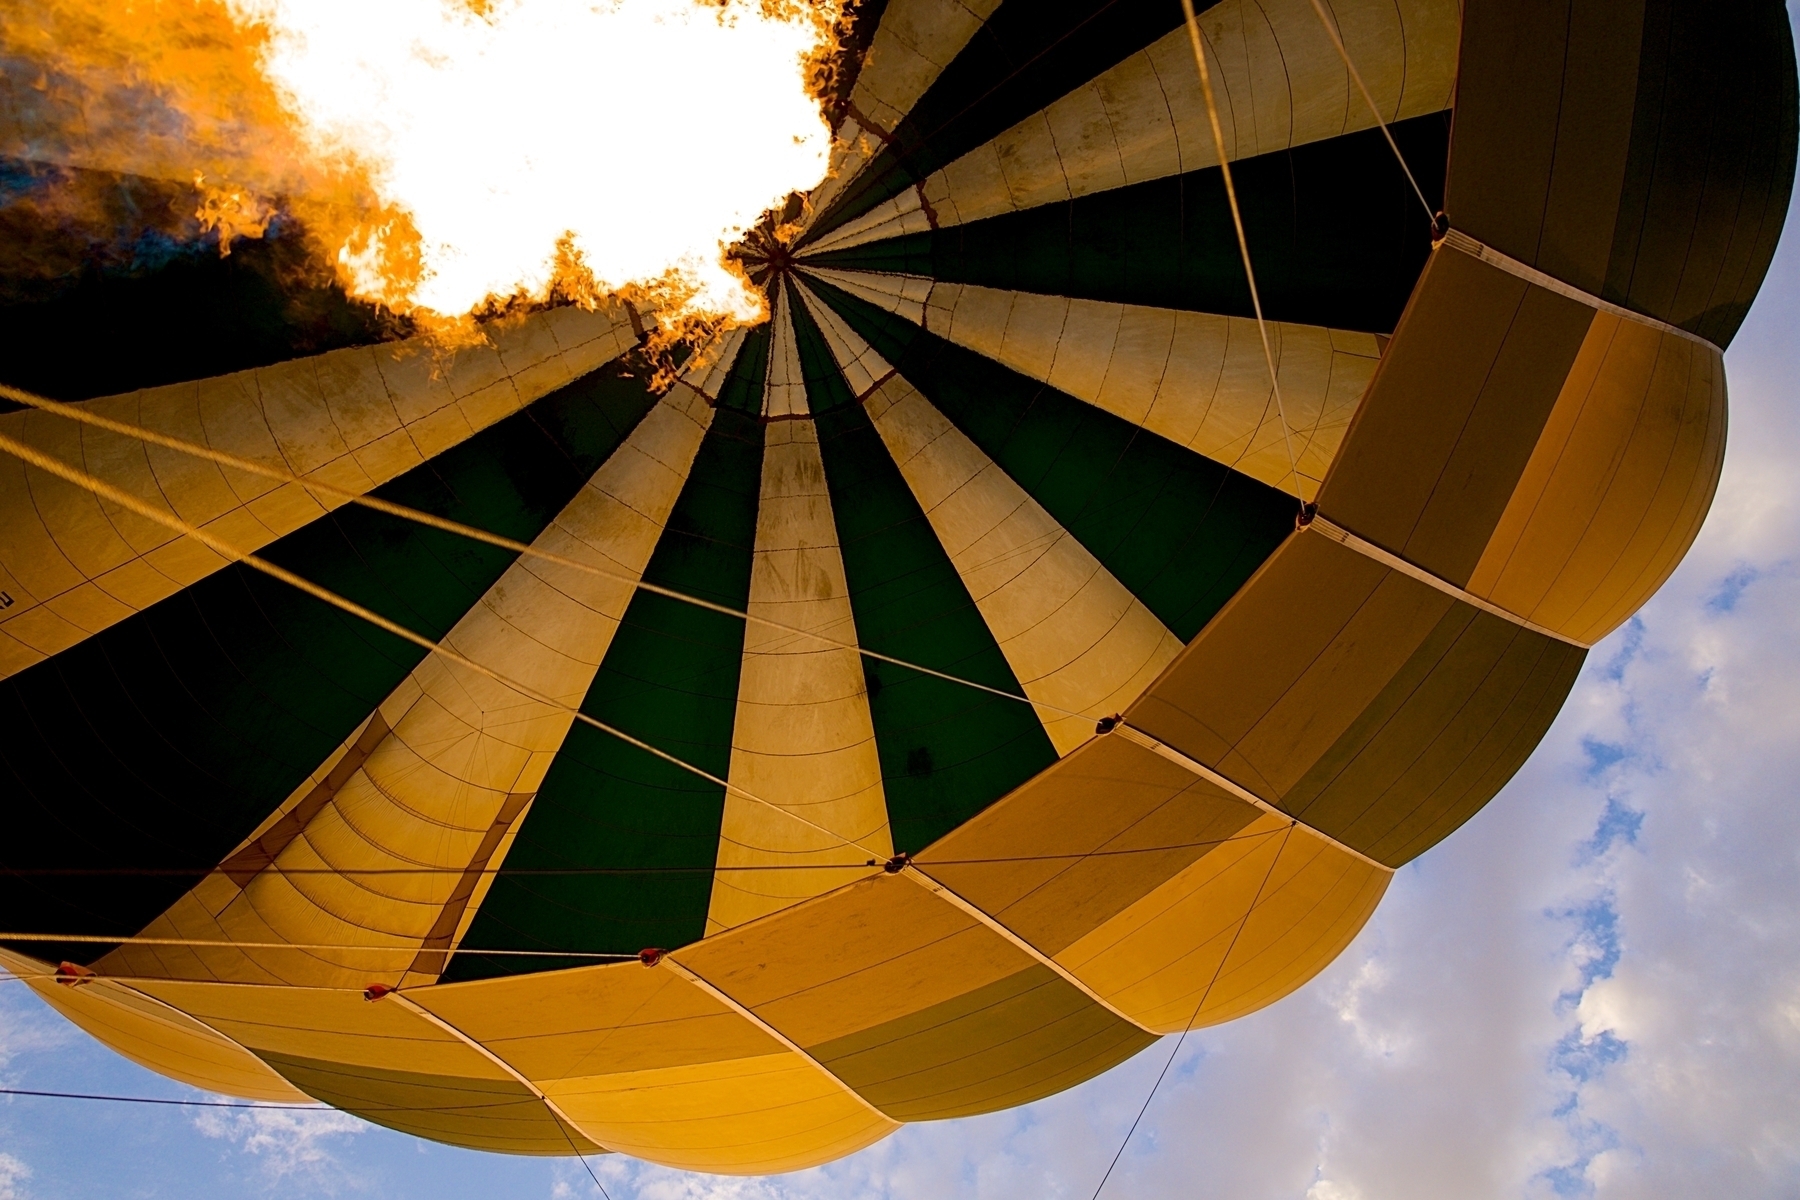 A photo taken up showing the inside of a ballon against the sky. A flame is burning.